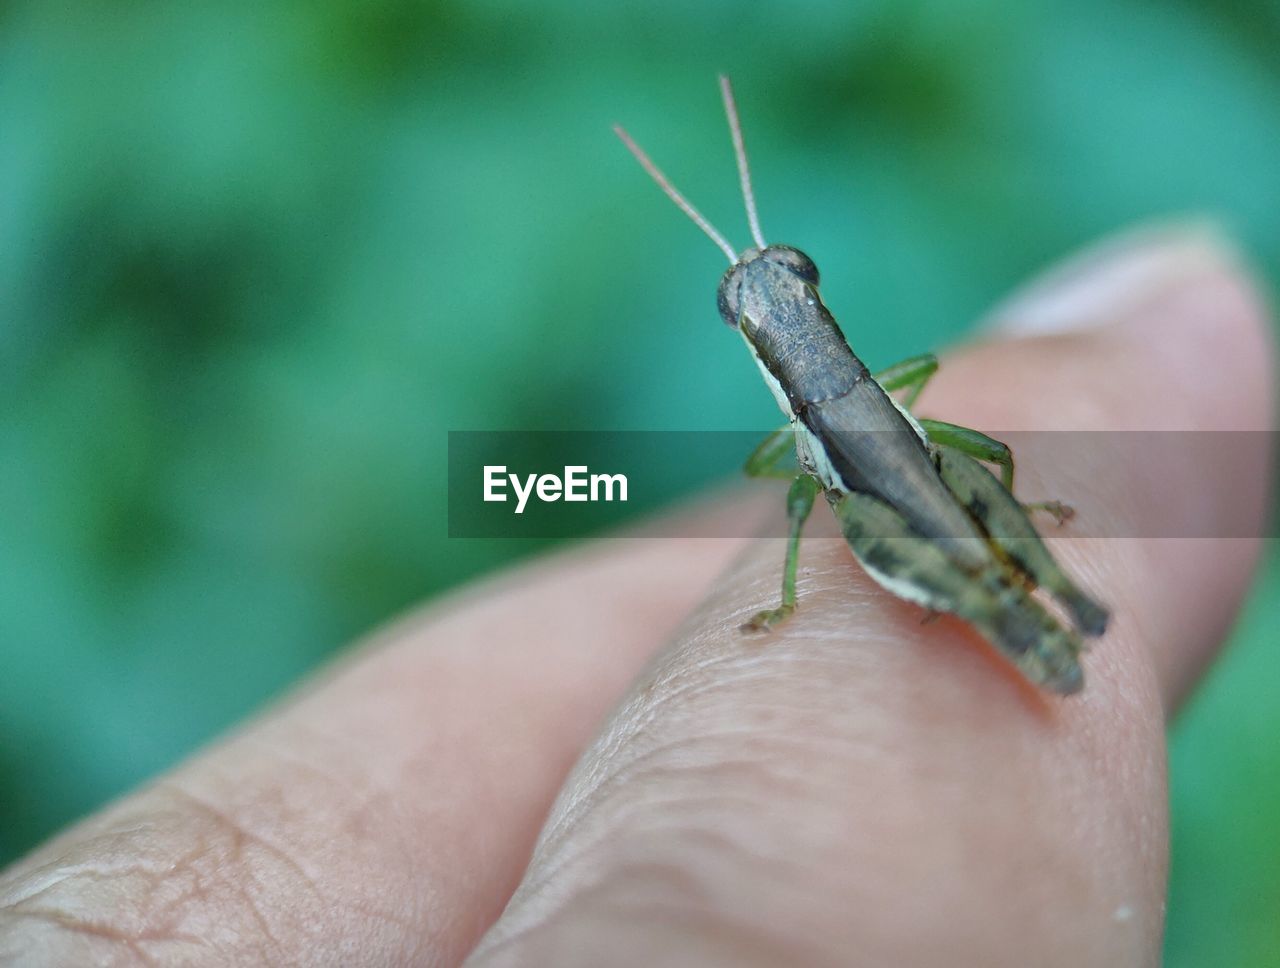 Close-up of grasshopper on hand